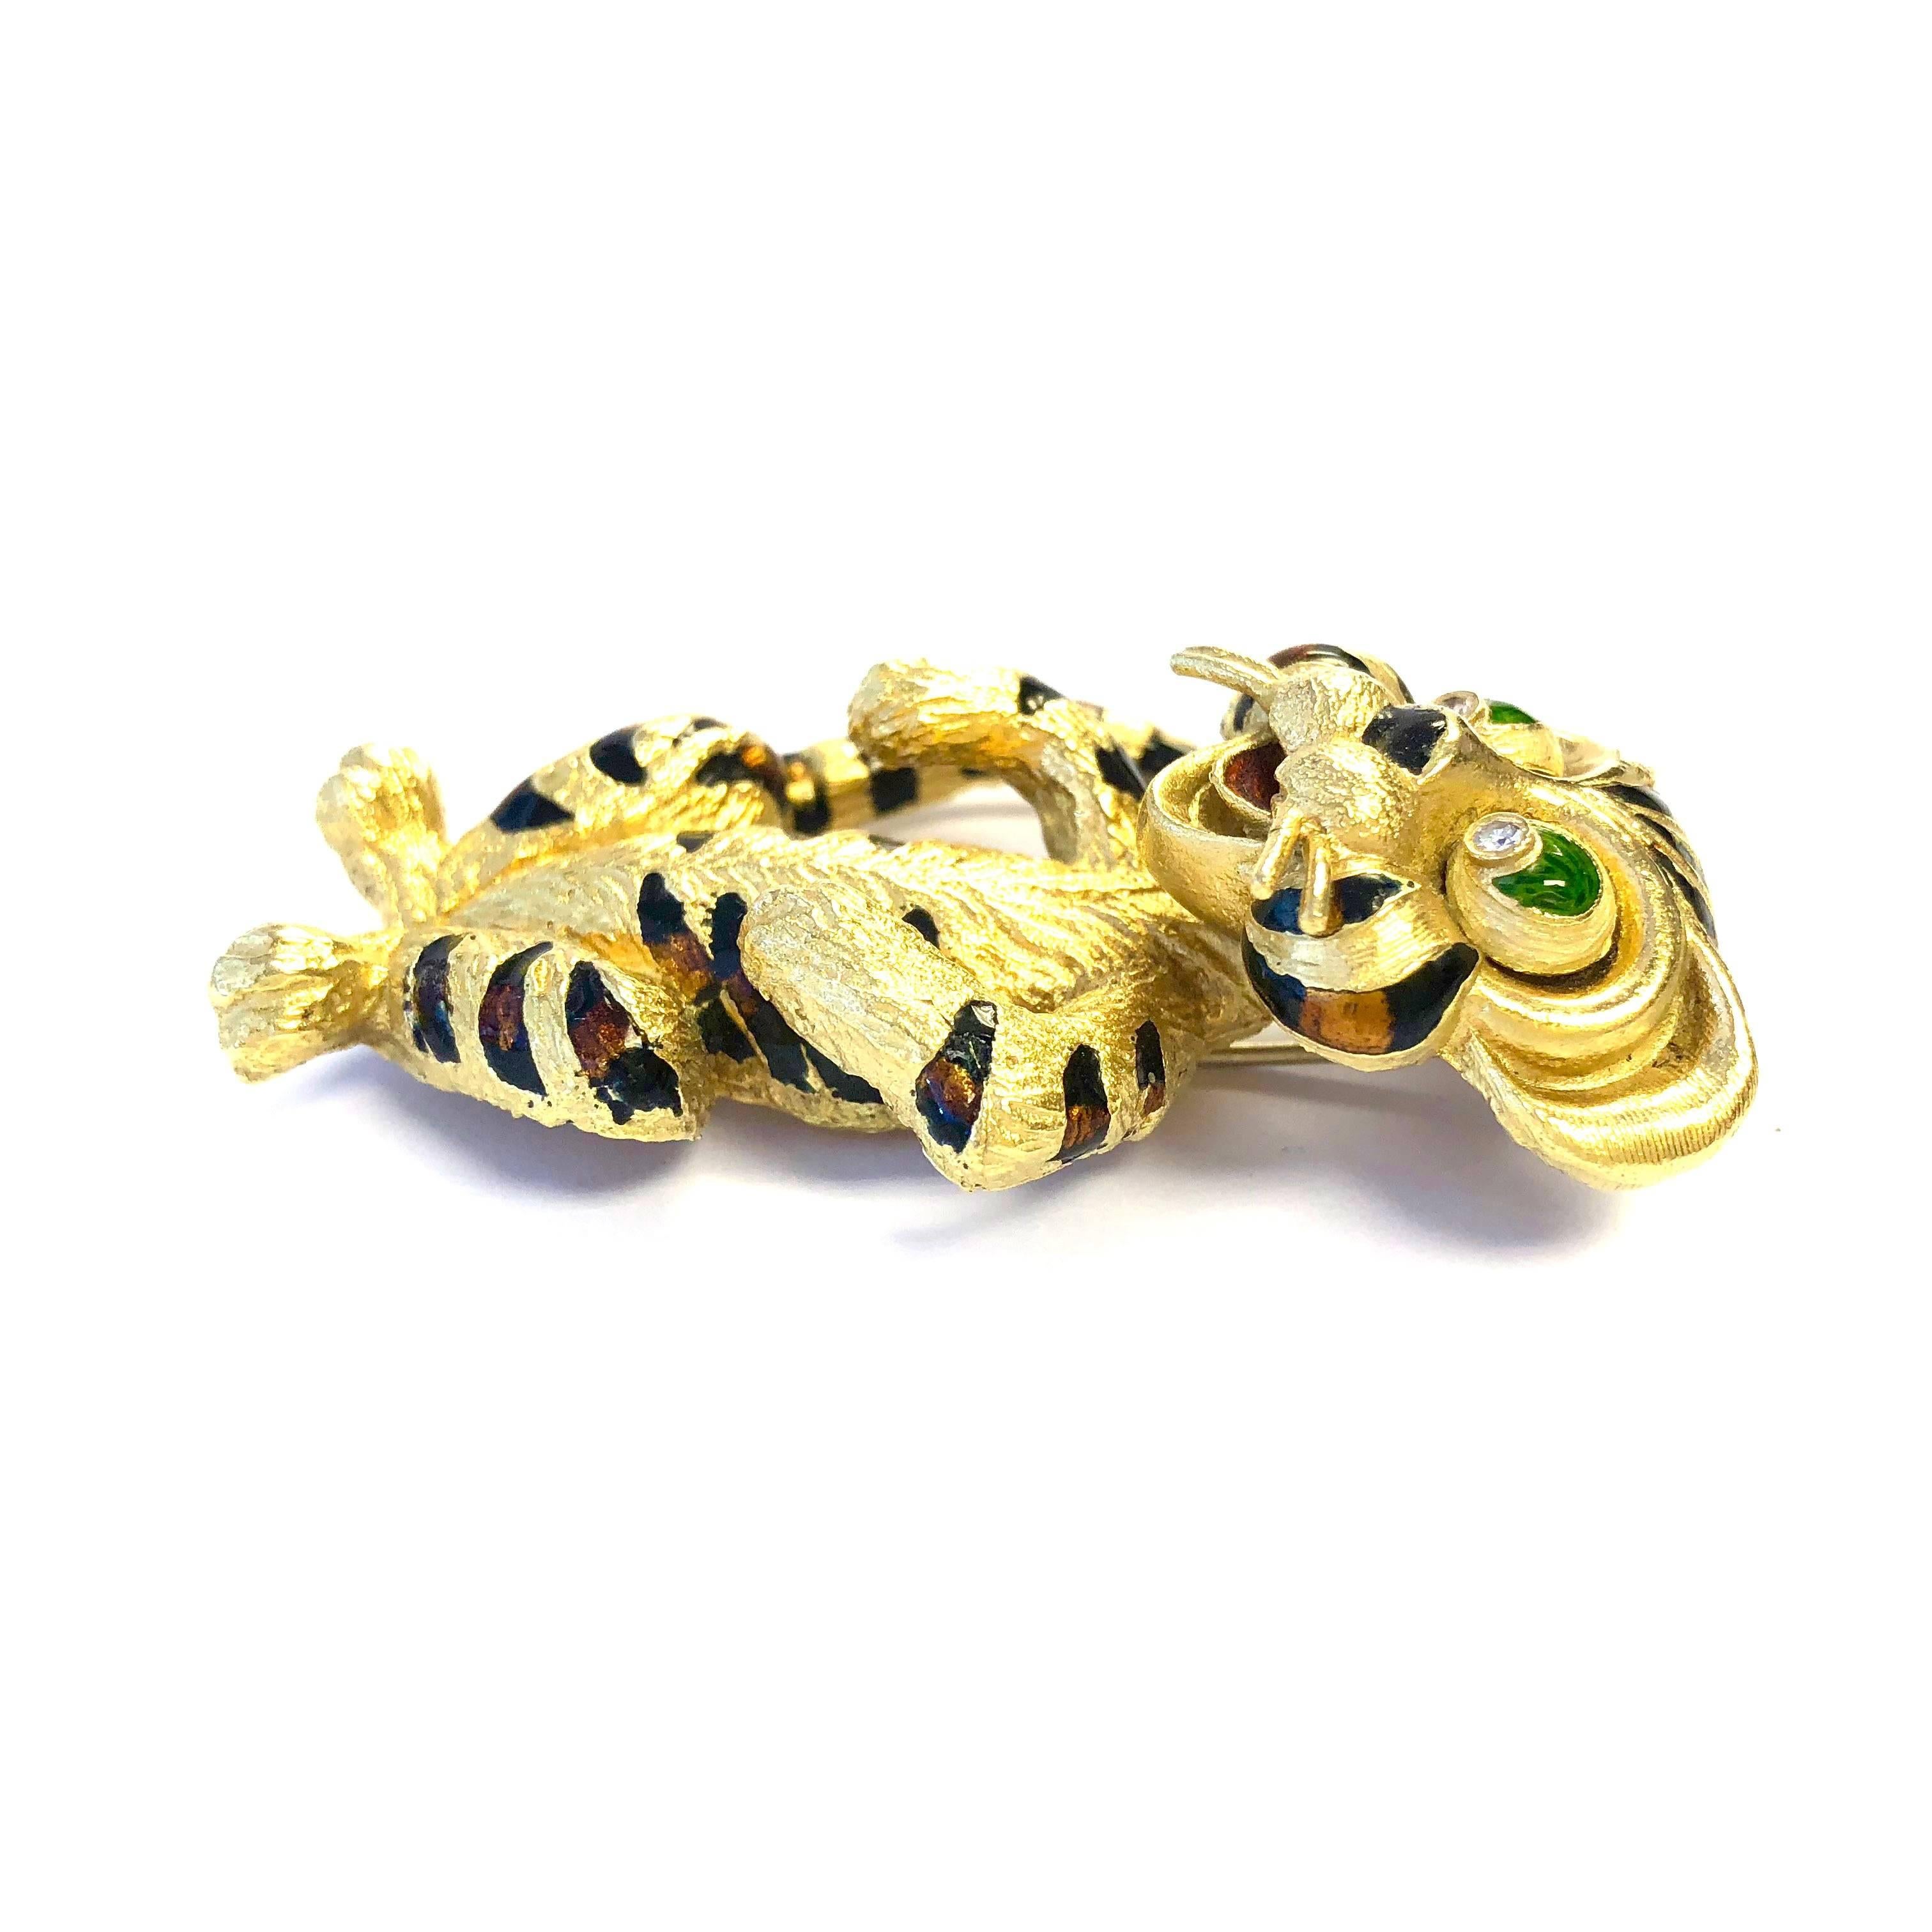 Crafted in 18K yellow gold, featuring a large three dimentional design tiger cub with diamond and enamel eyes and enamel stripes. 
The brooch measures: 2 1/4 inch heigh (57 mm), 7/16 inch wide (37 mm) and 11//16 inch deep (17.5 mm).
Weight: 34.6